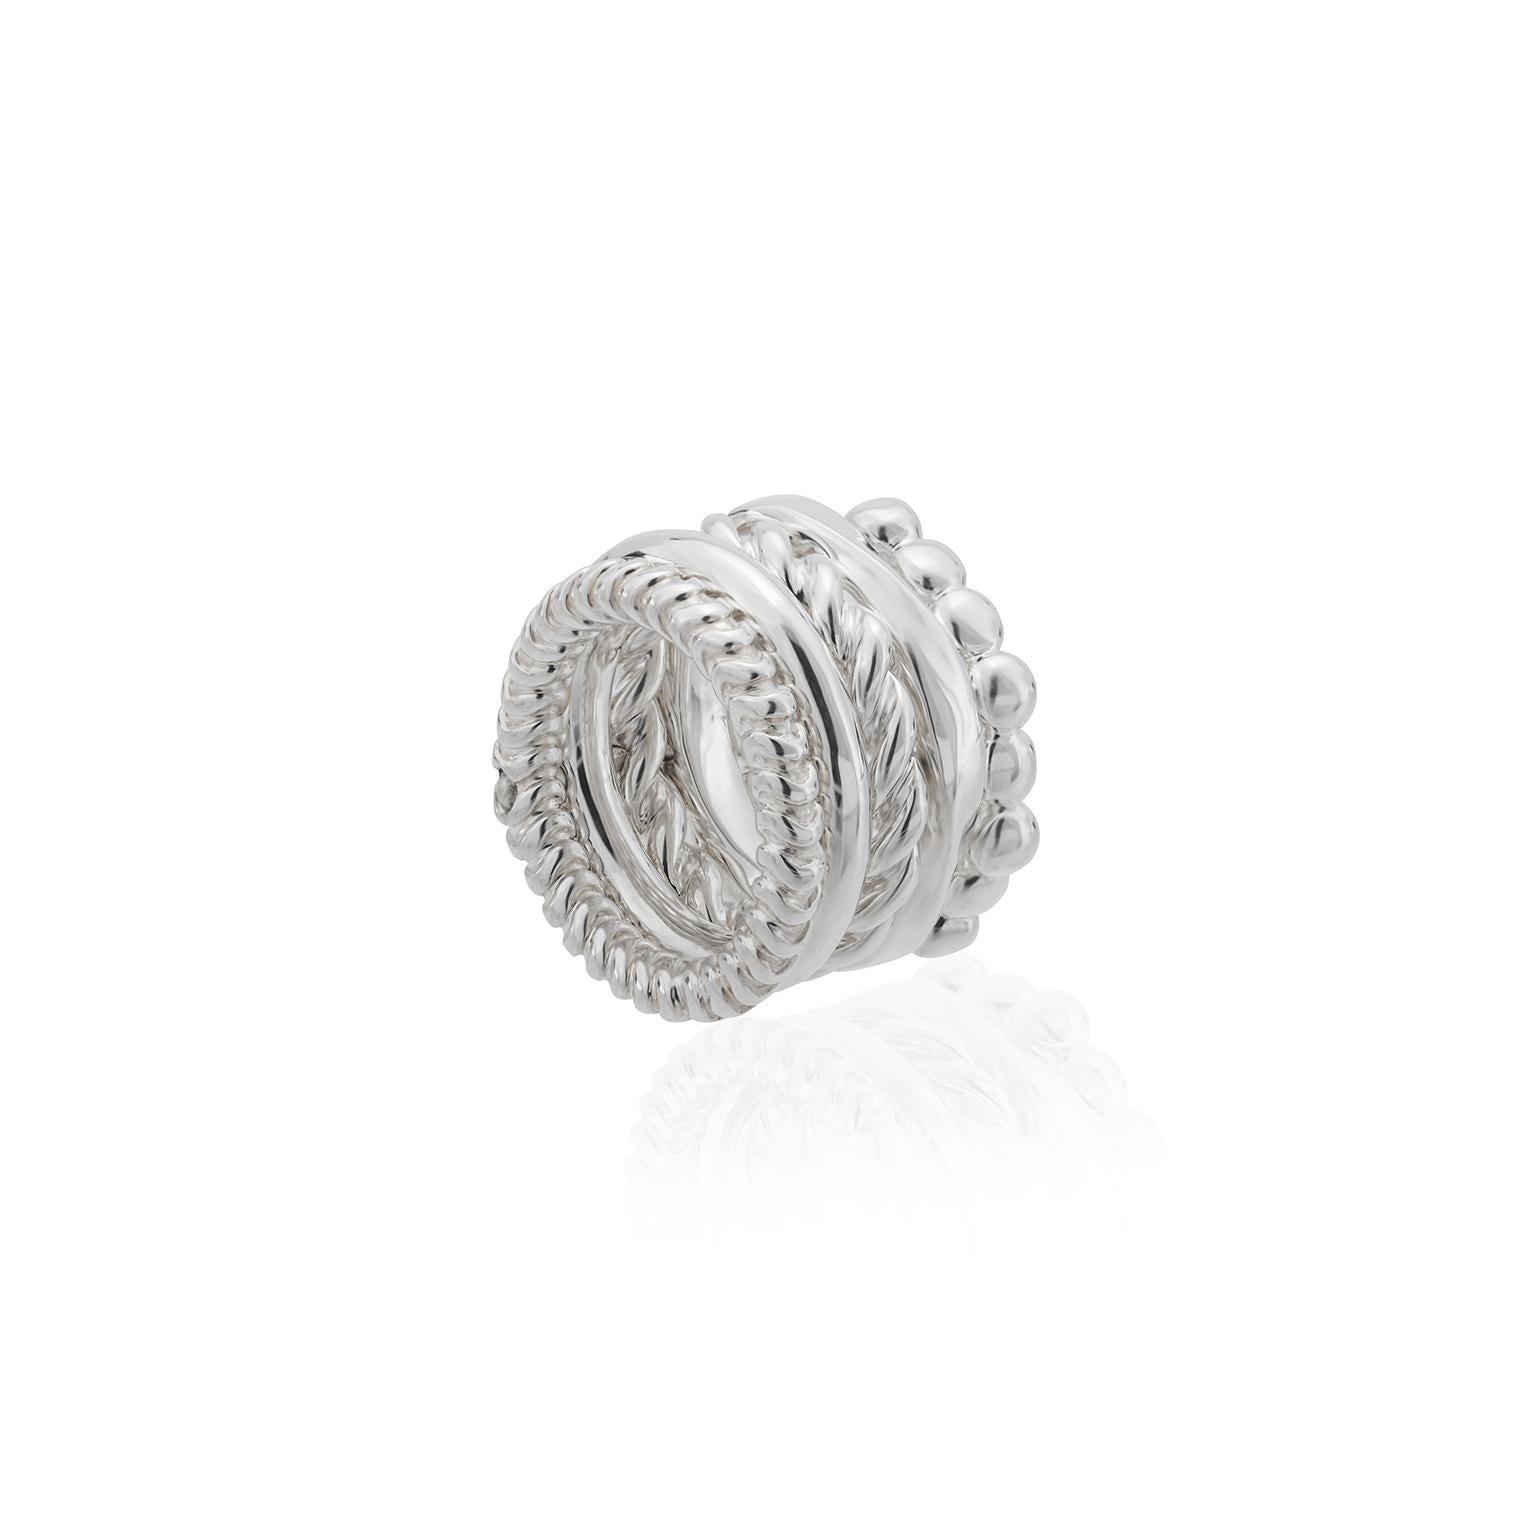 Fun and dynamism are brought together in this stunning ring made up of five completely unique rings handmade in sterling silver. A stunning tribute to the churumbelas created by Pedro Leites, this new version of Churumbelas is created from 5 new